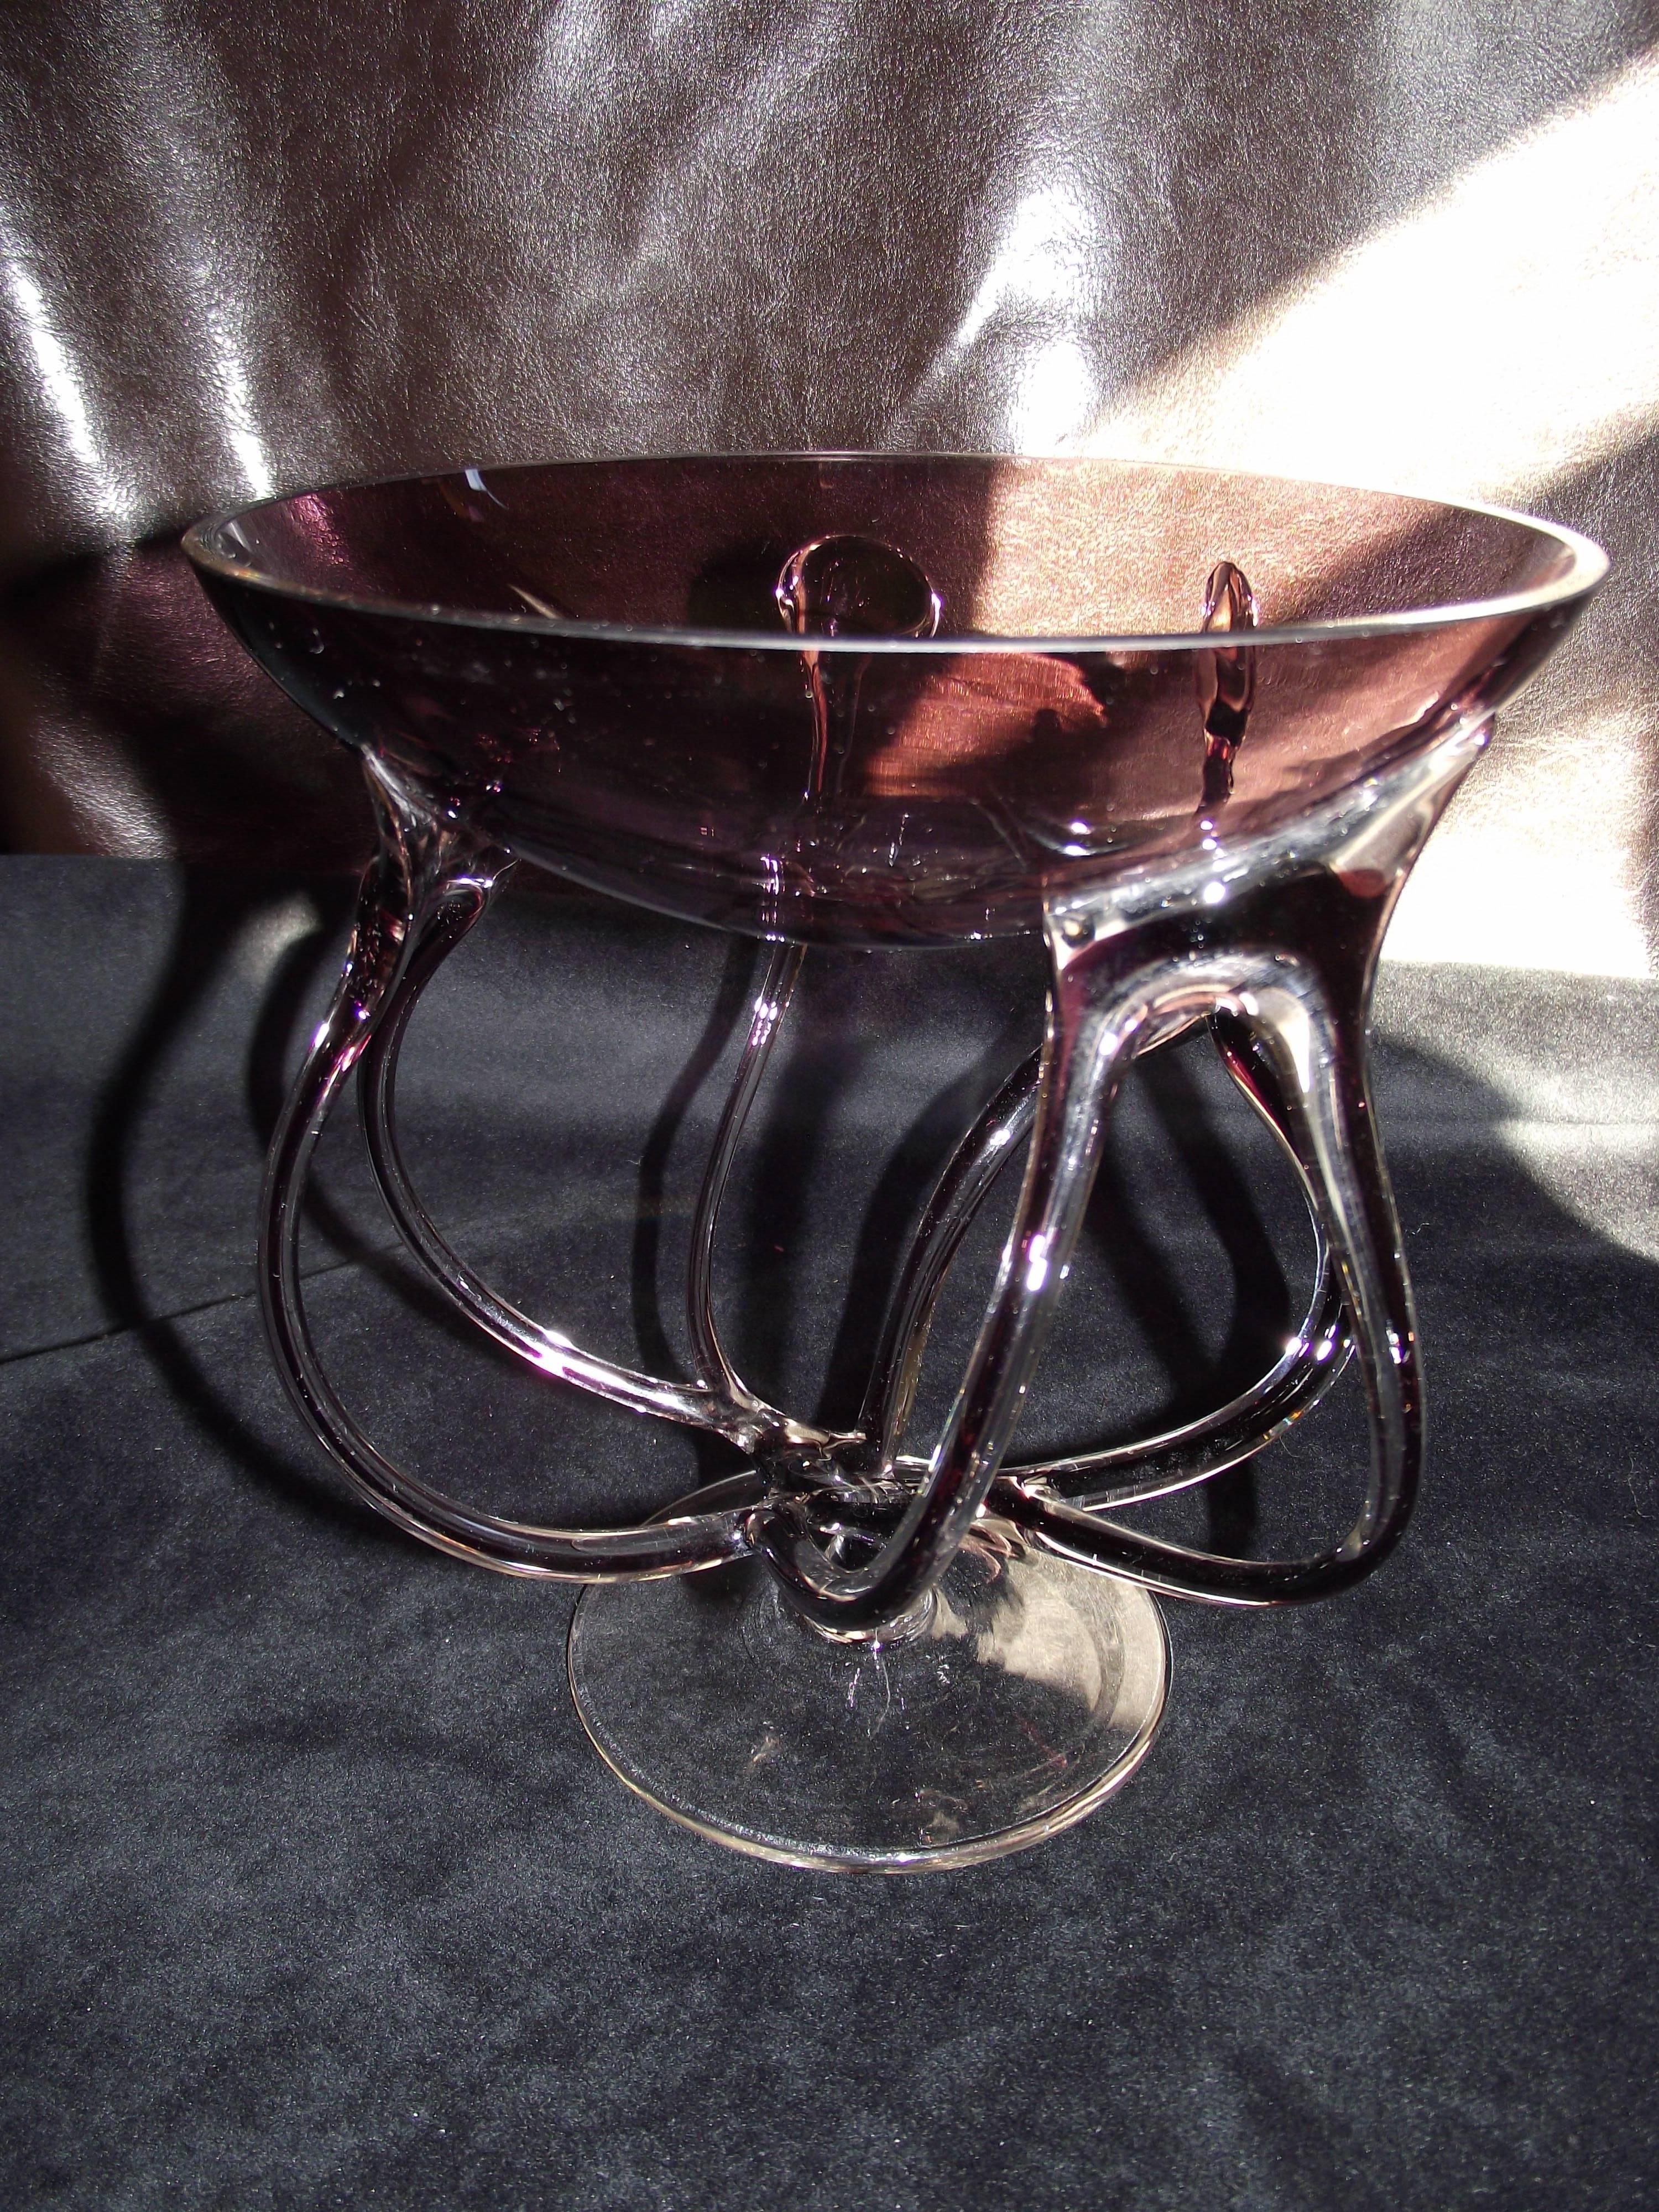 This one of a kind art glass piece has the free flowing lines of contemporary design with reference to a classic footed bowl. The bowl itself is a perfect shape of amethyst glass. The swirling legs area mix of clear and amber glass attaching to a